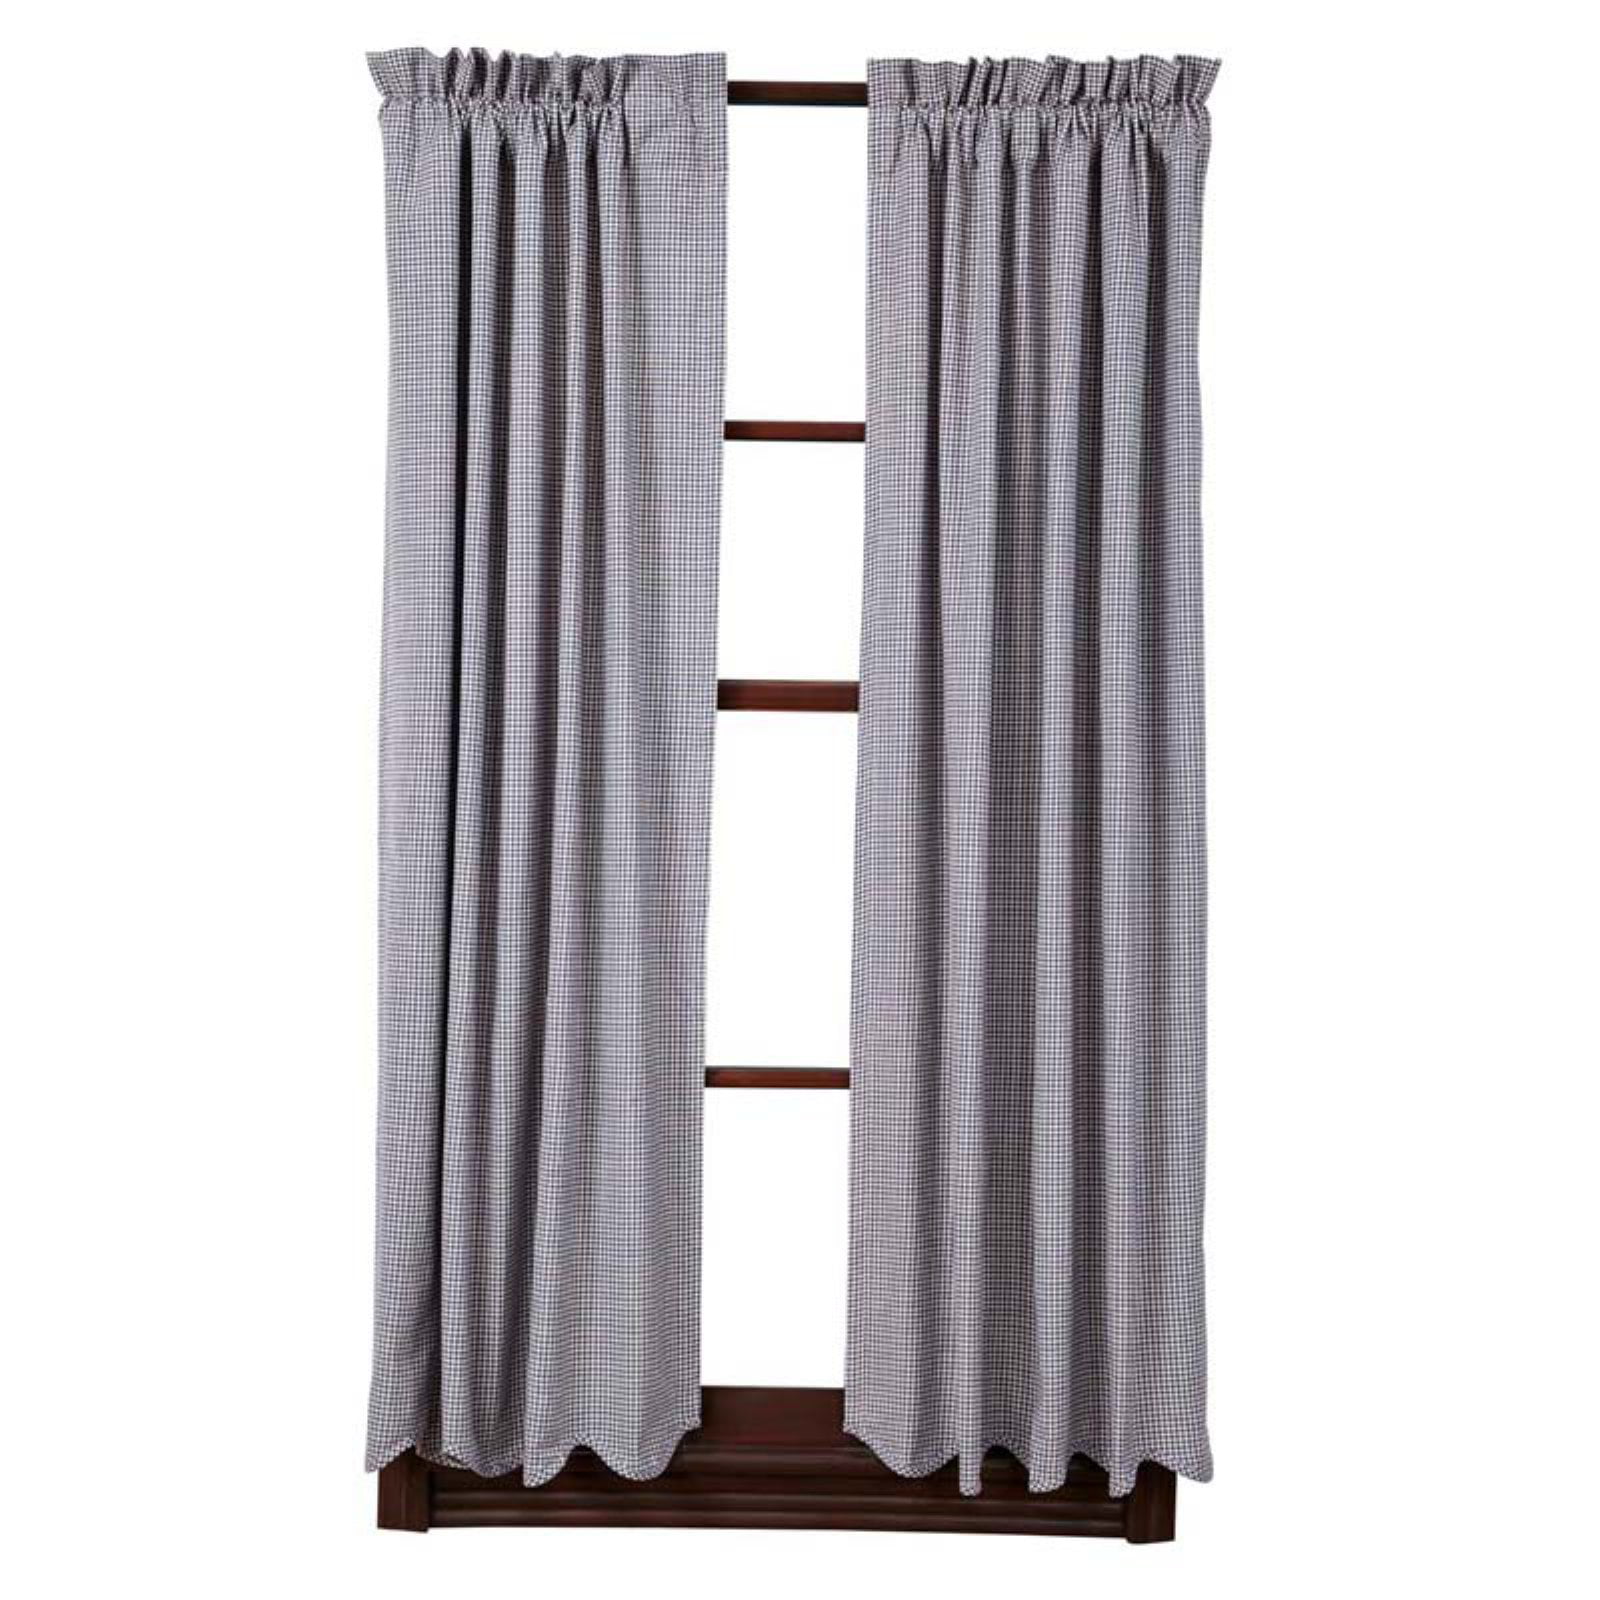 100% Cotton-Scalloped-3 Available Details about   Country Curtains Lined Valance 